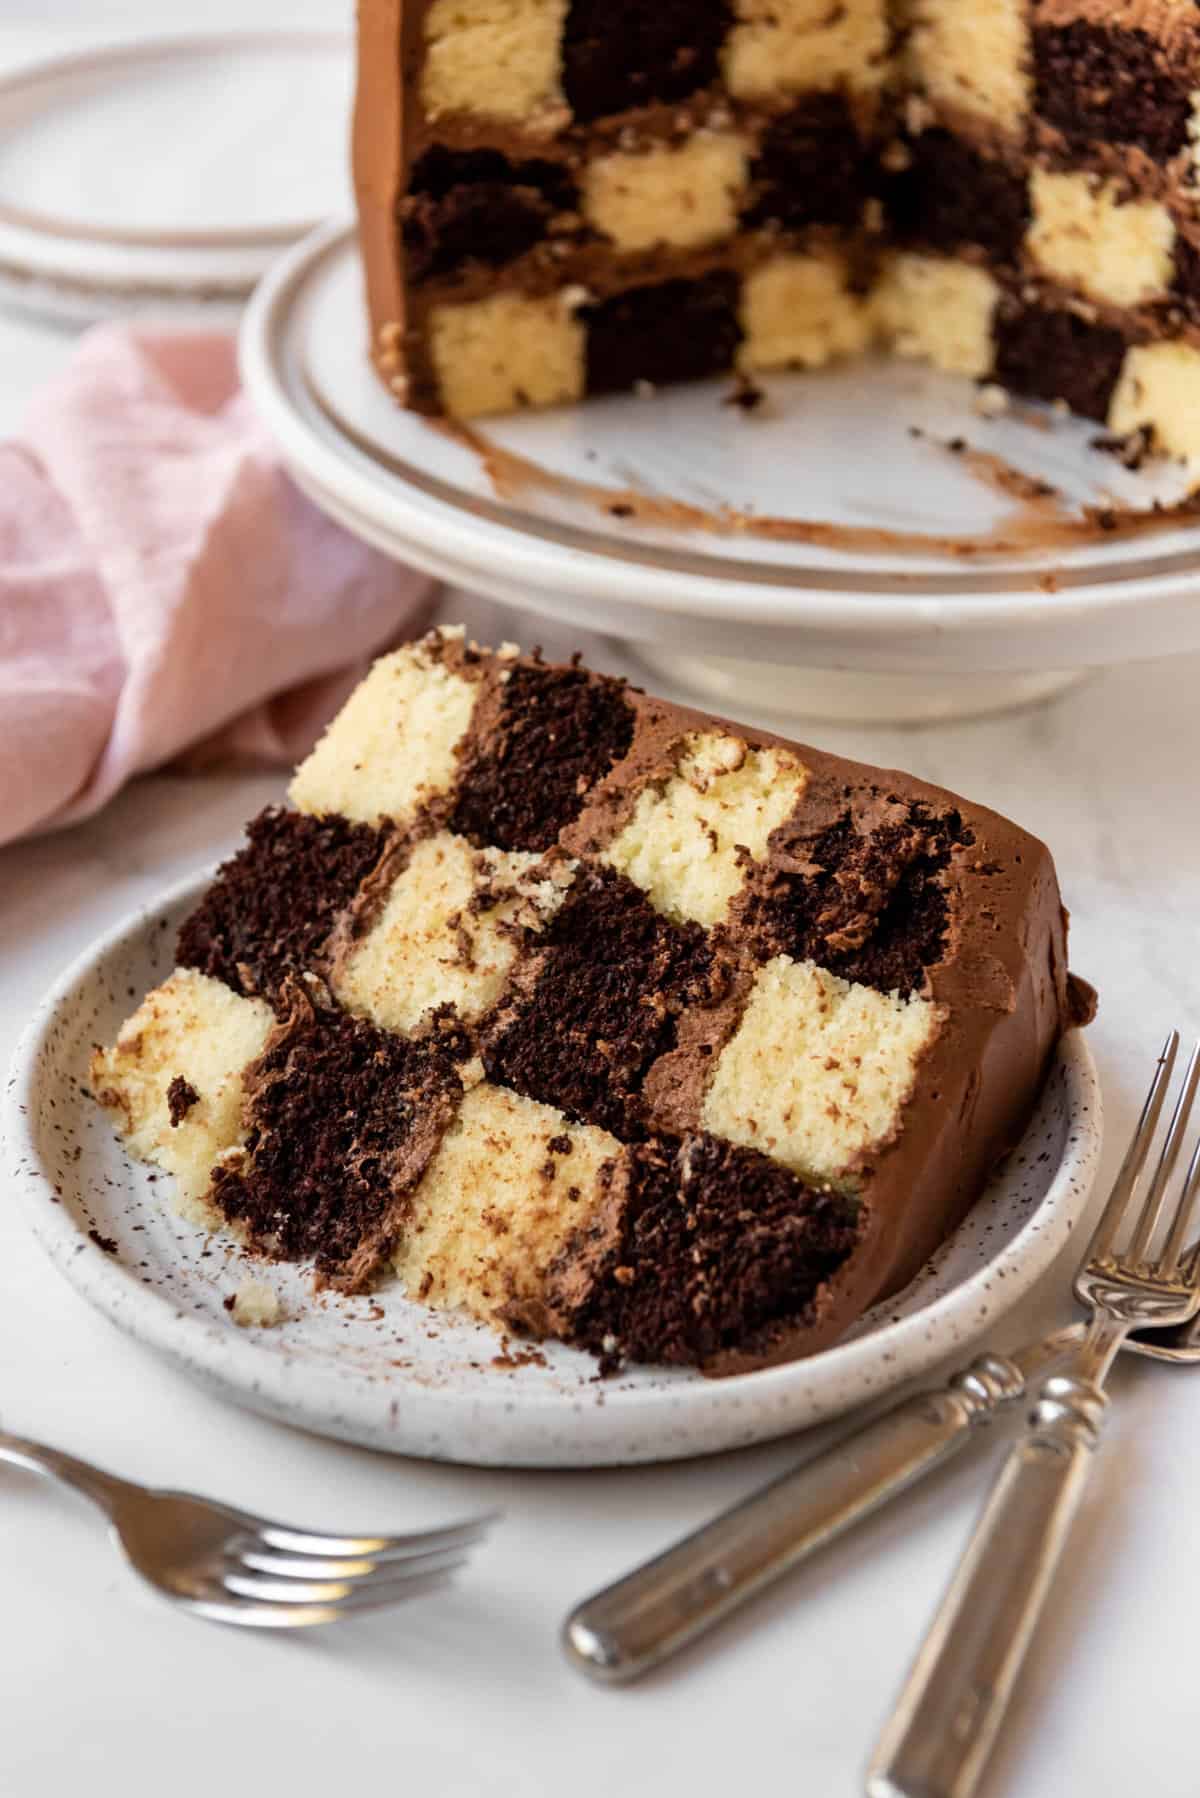 A slice of checkerboard cake on a white plate next to forks.